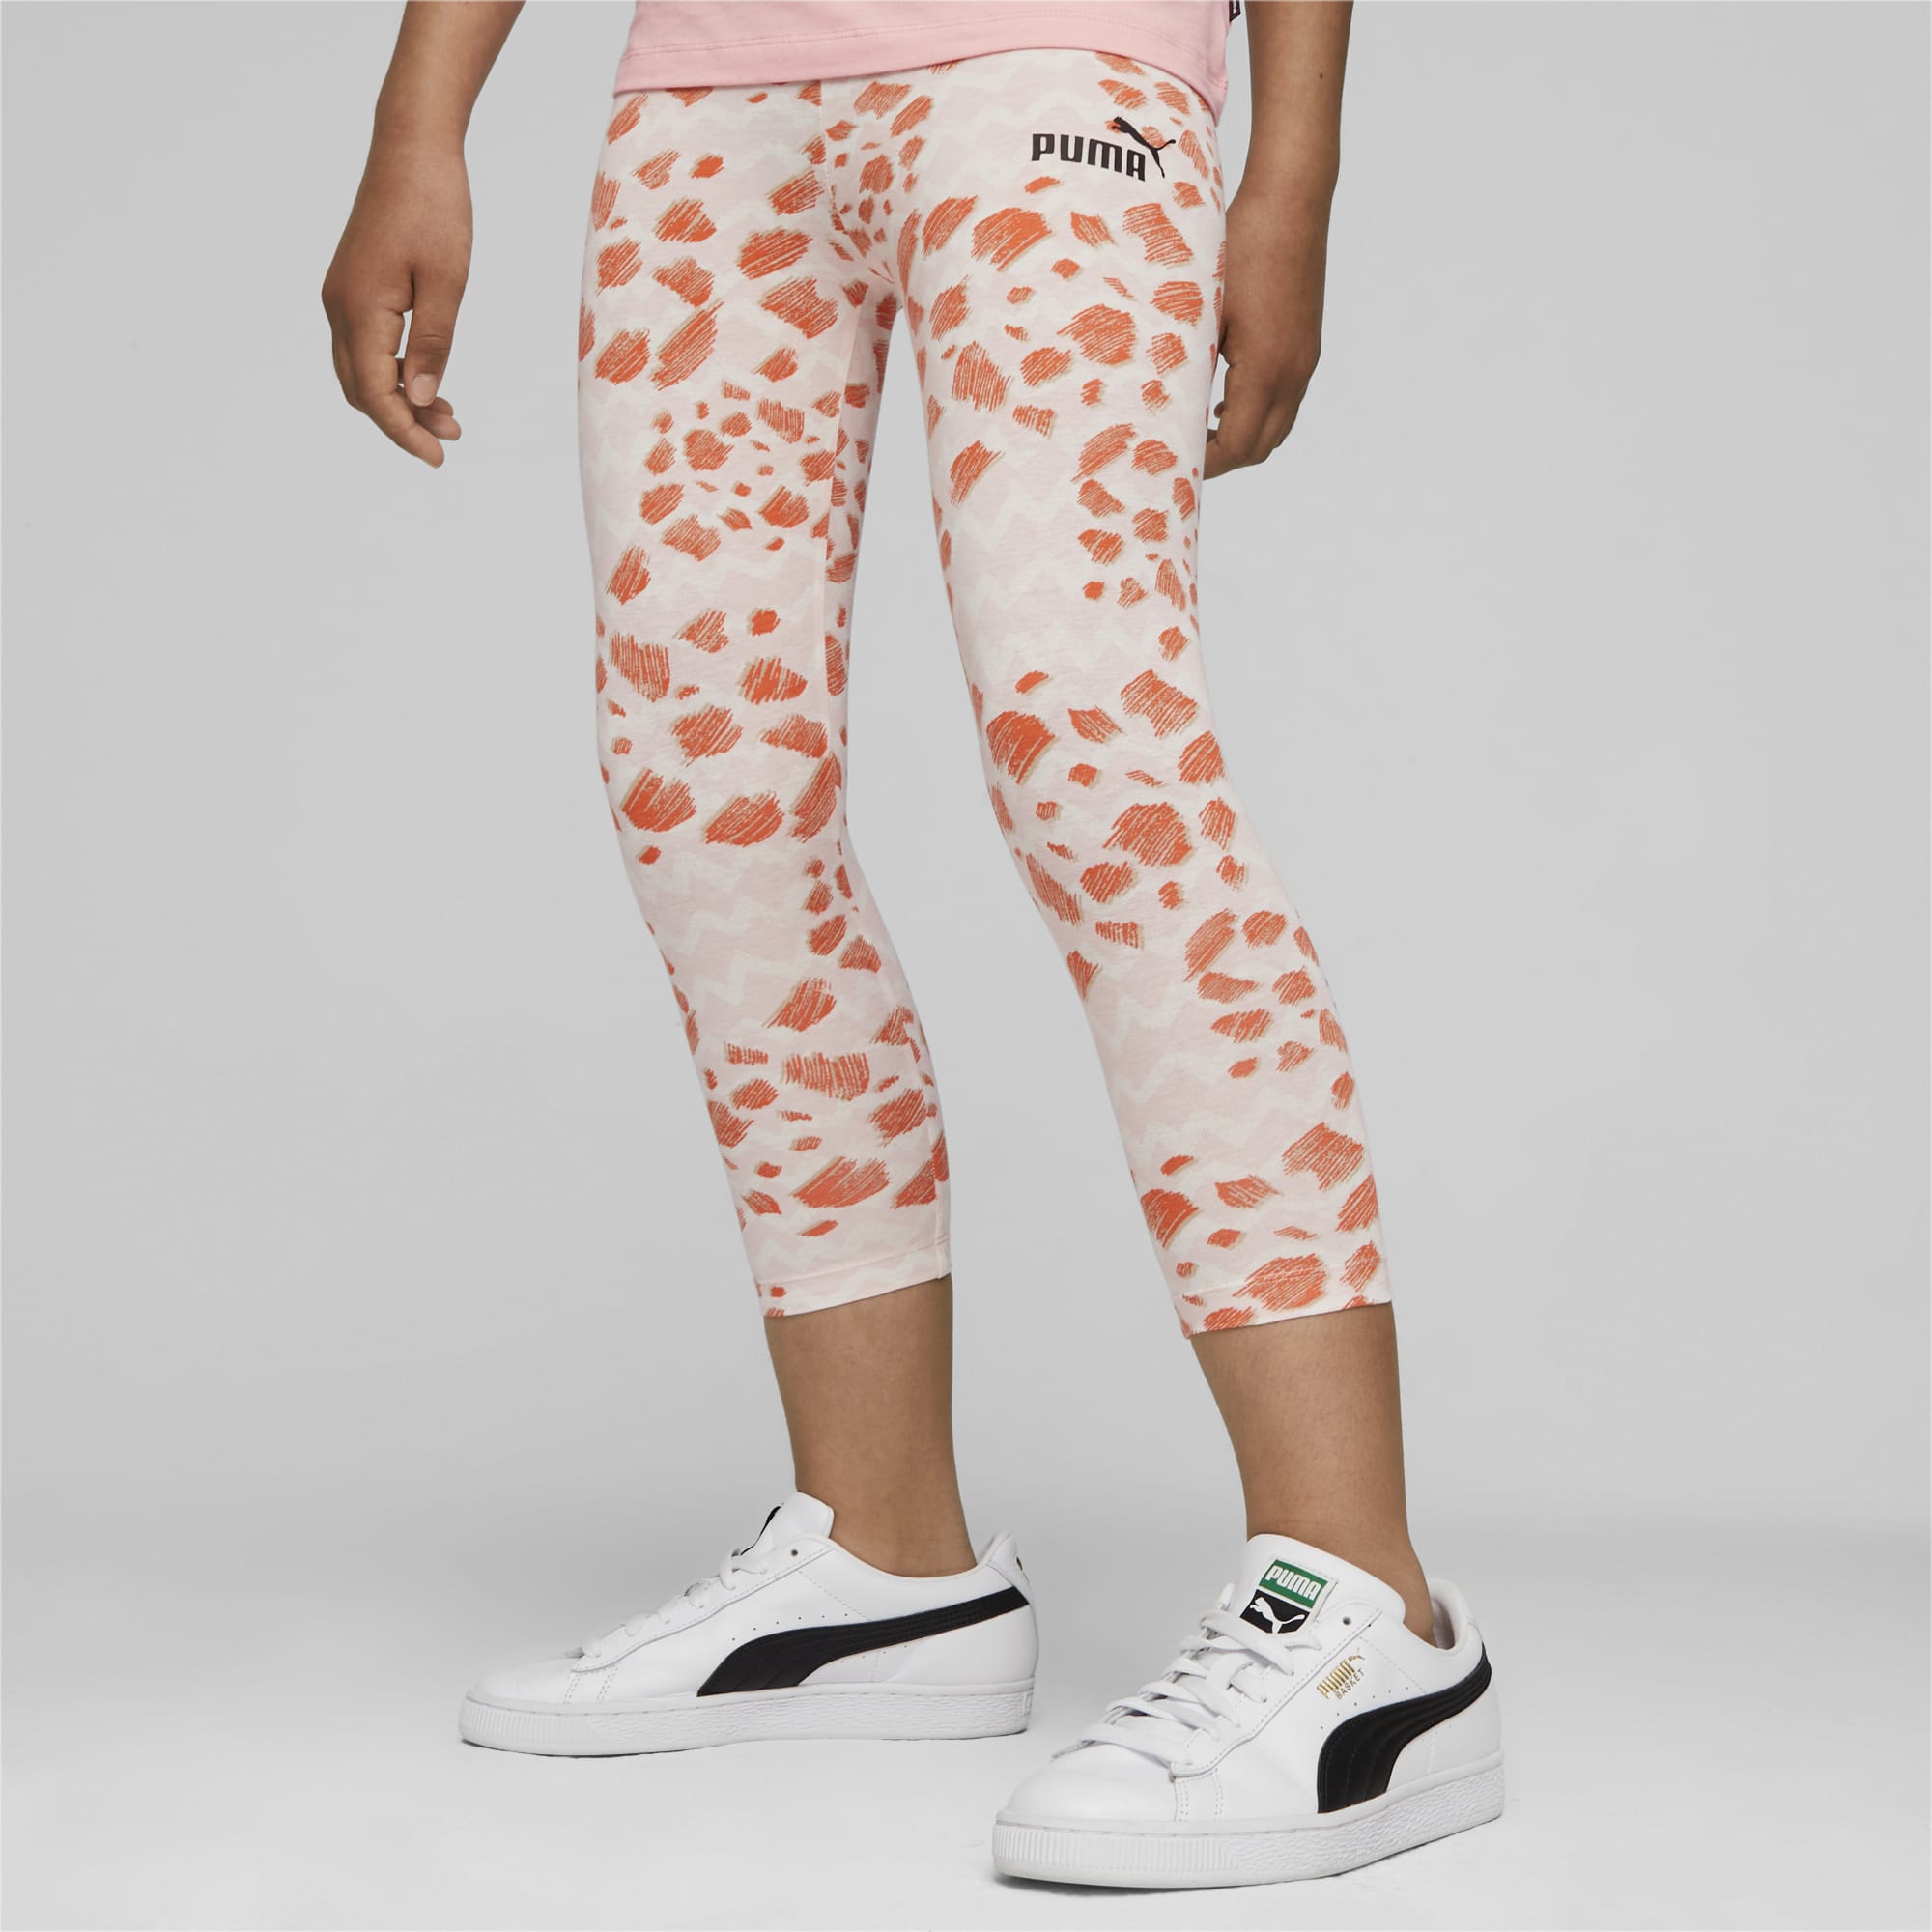 New Mix leggings one size Size undefined - $15 New With Tags